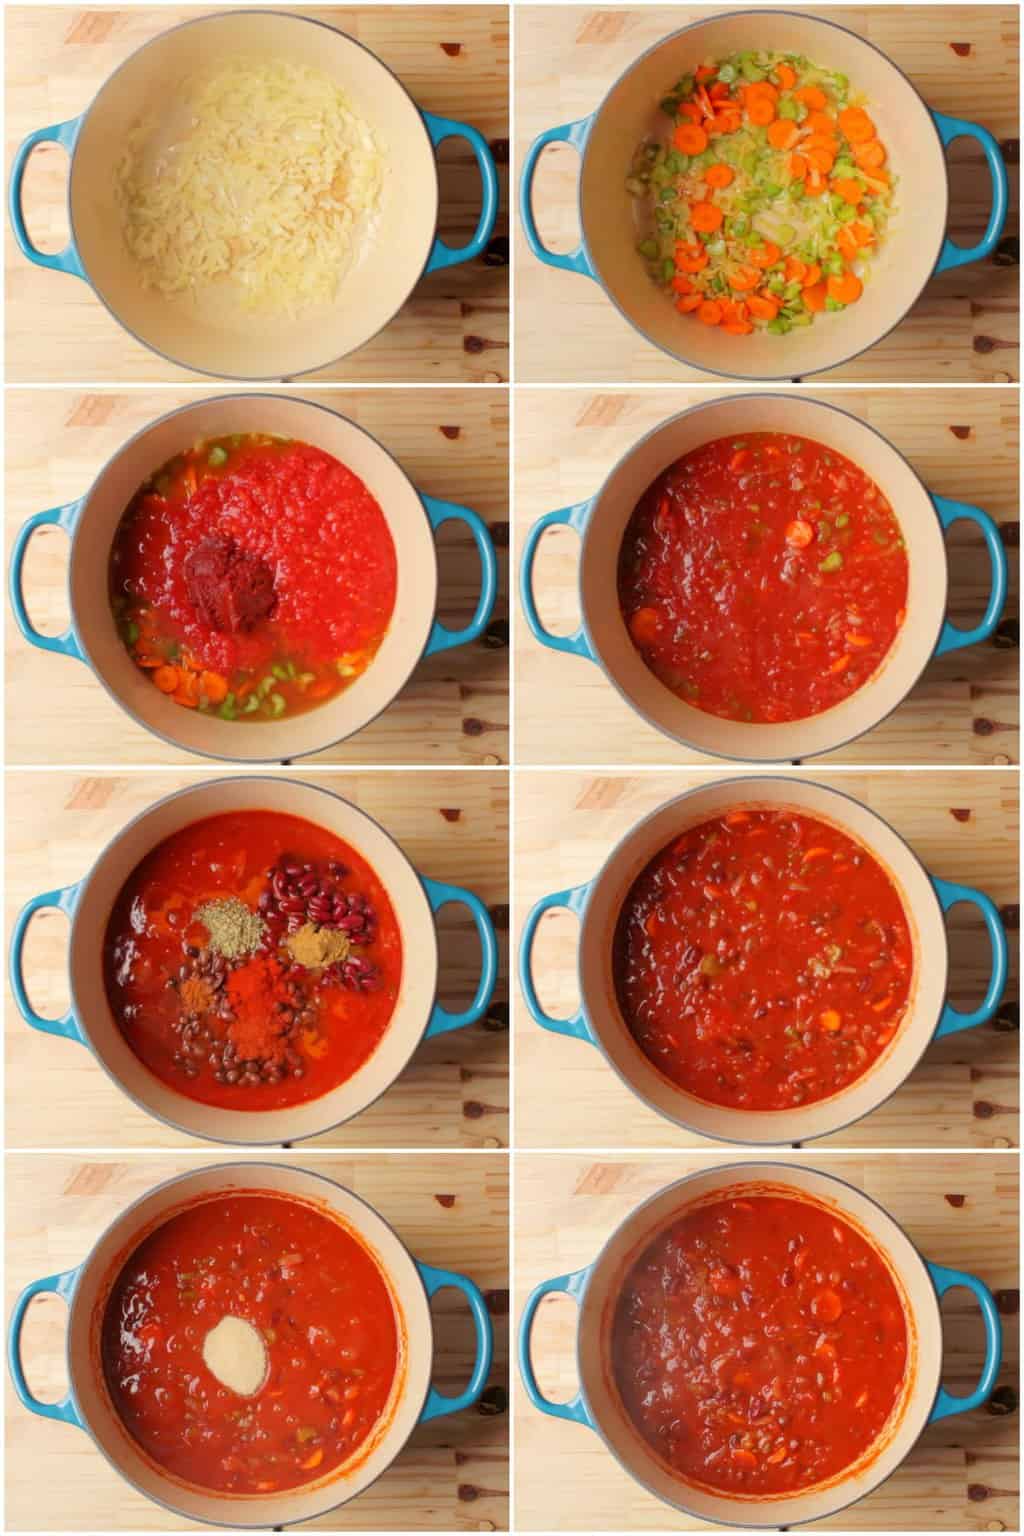 Step by step process photo collage of making vegan chili.